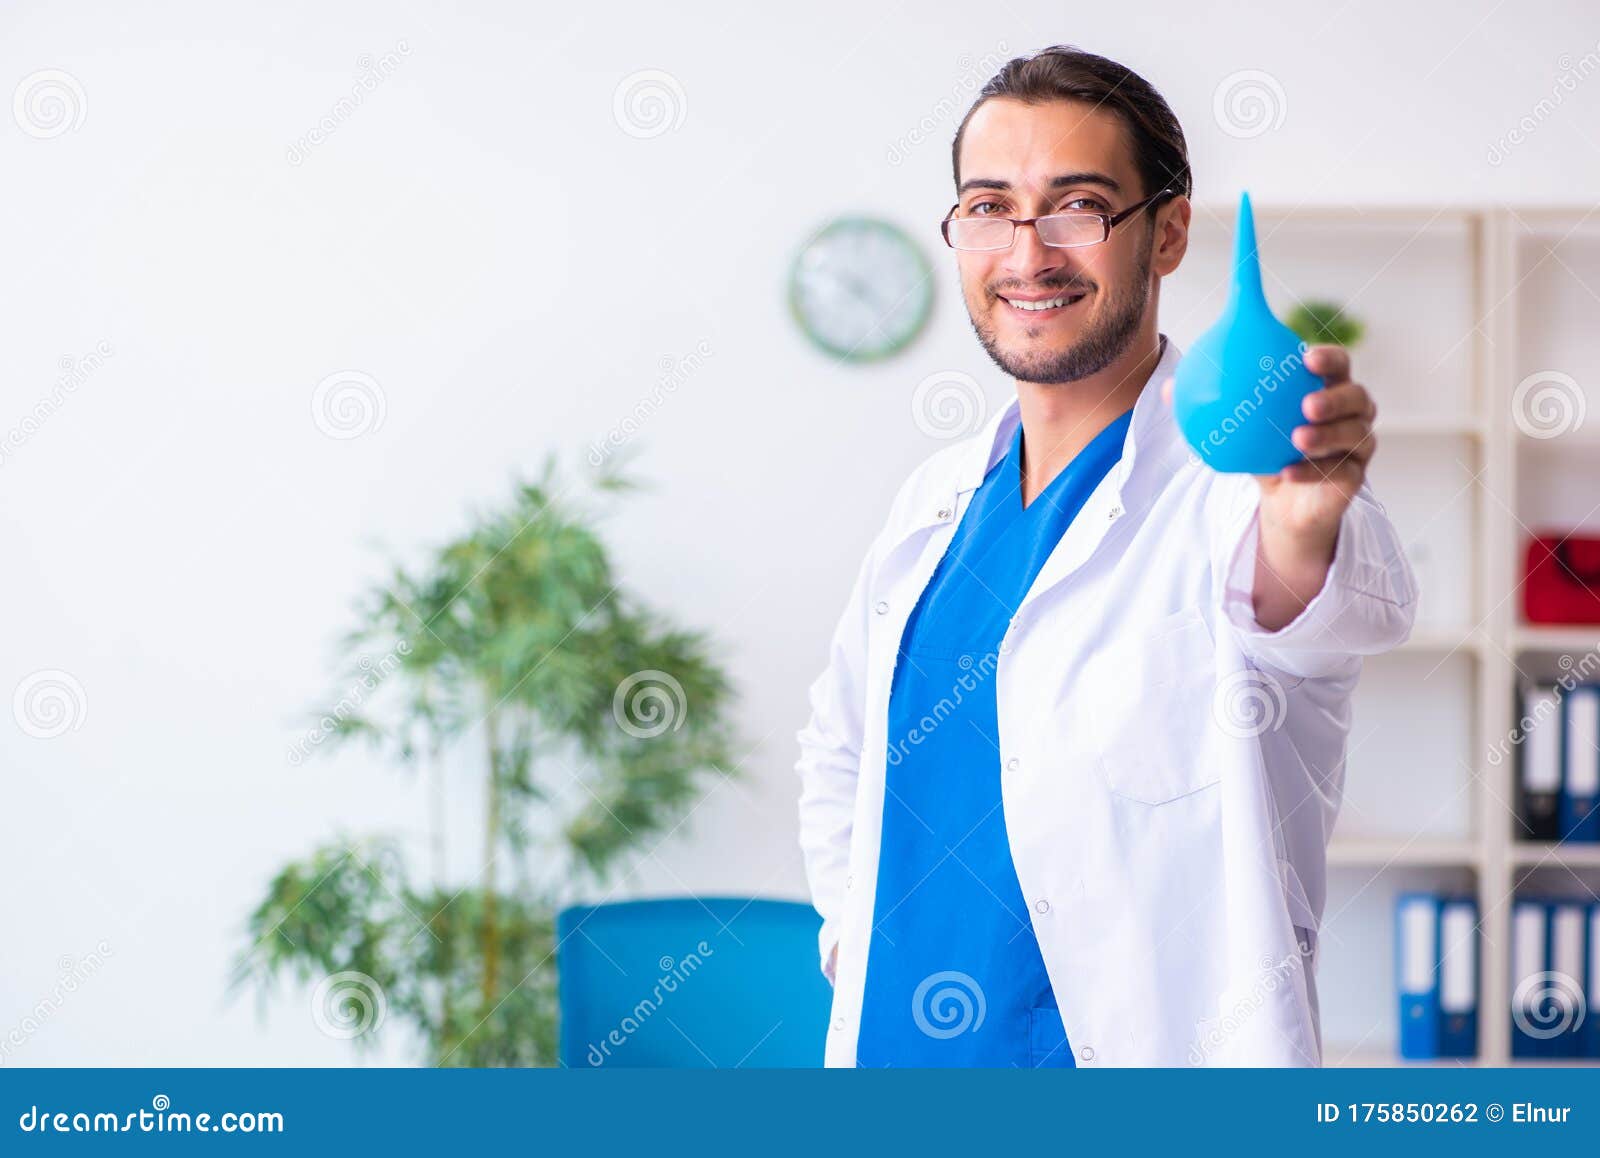 young male doctor gastroenterologist working in the clinic